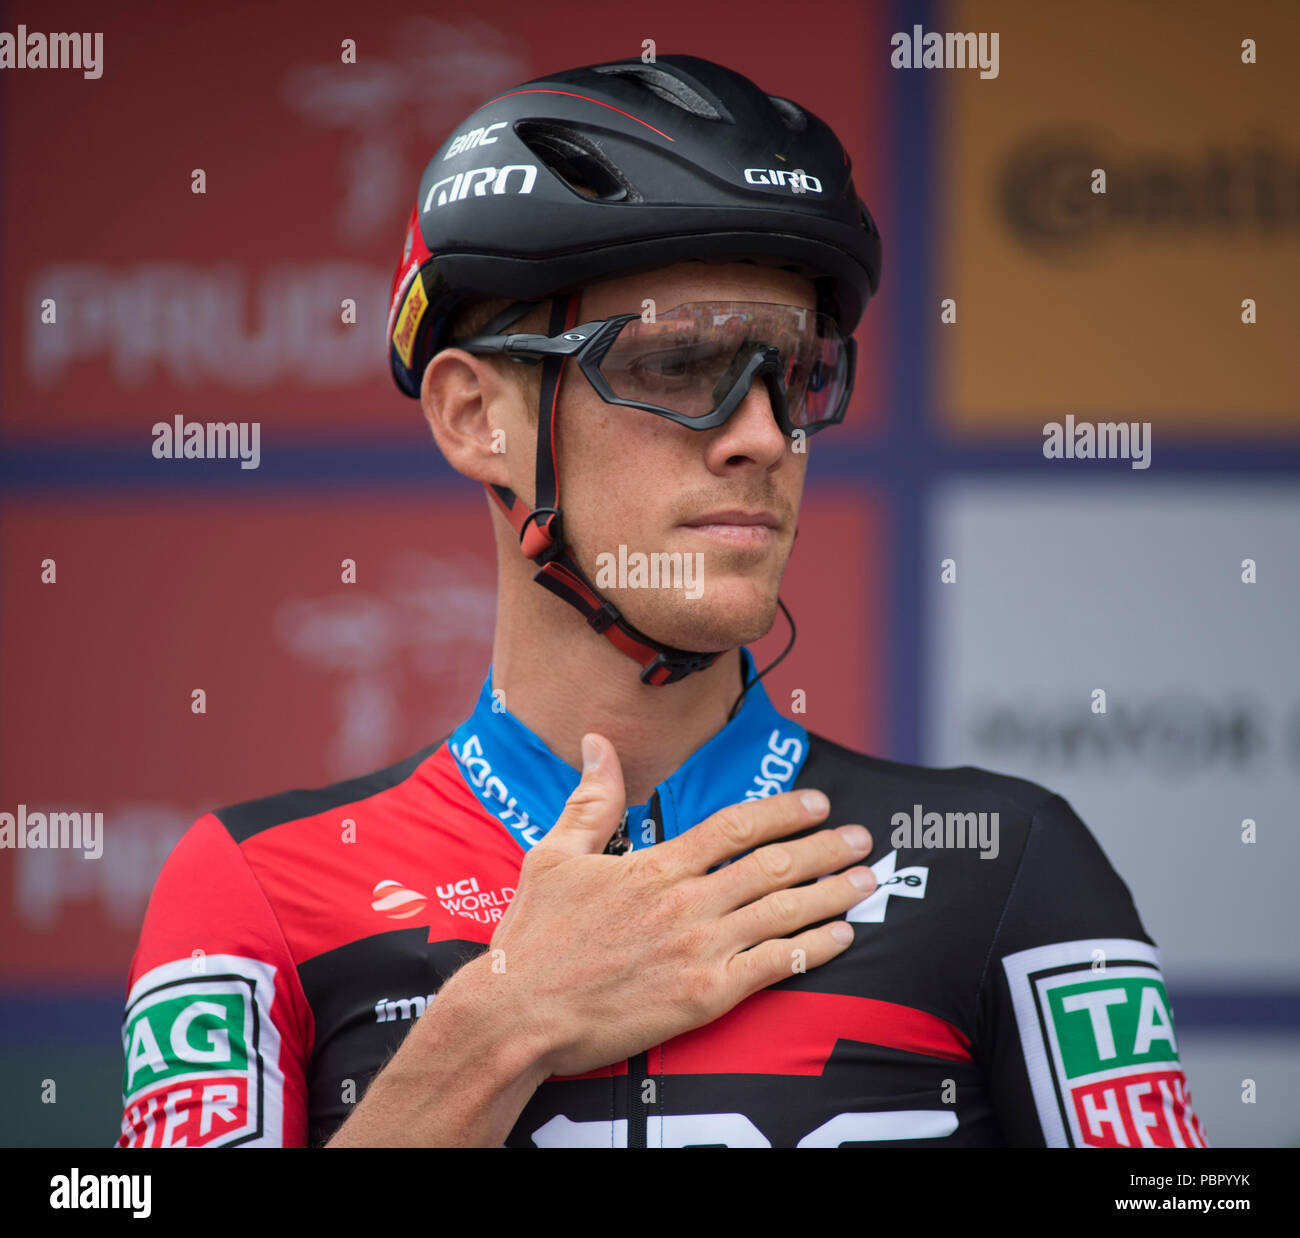 Horse Guards Parade, London, UK. 29 July, 2018. Britain’s only men’s UCI WorldTour race lines up for race start in central London with the riders and teams presented to spectators. Photo: BMC Racing Team. Credit: Malcolm Park/Alamy Live News. Stock Photo